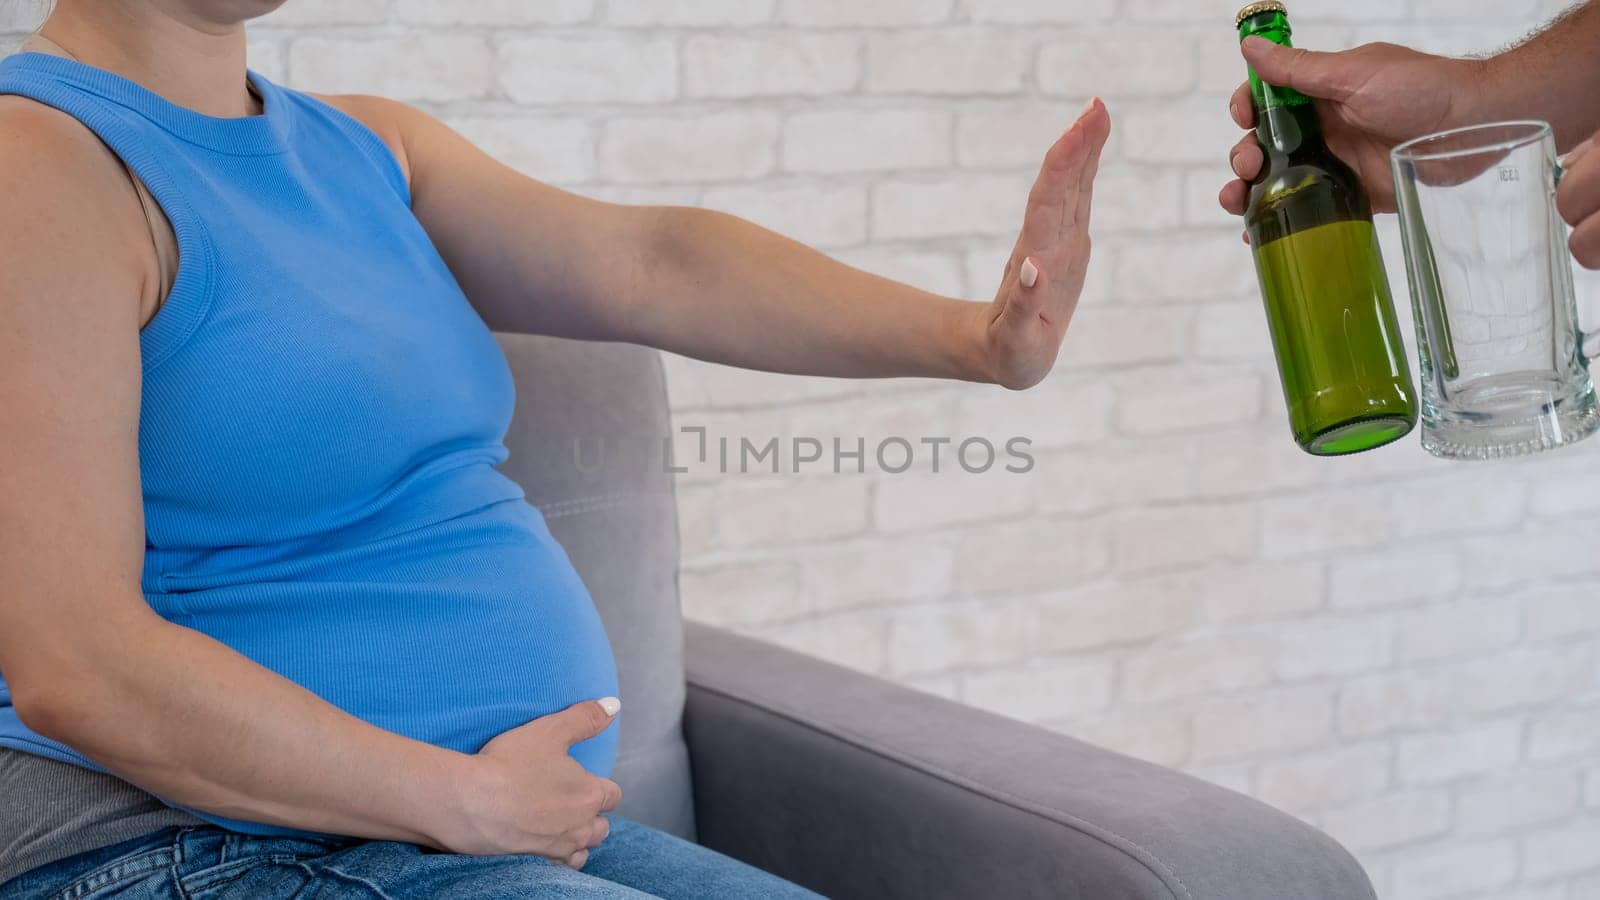 A pregnant woman refuses beer